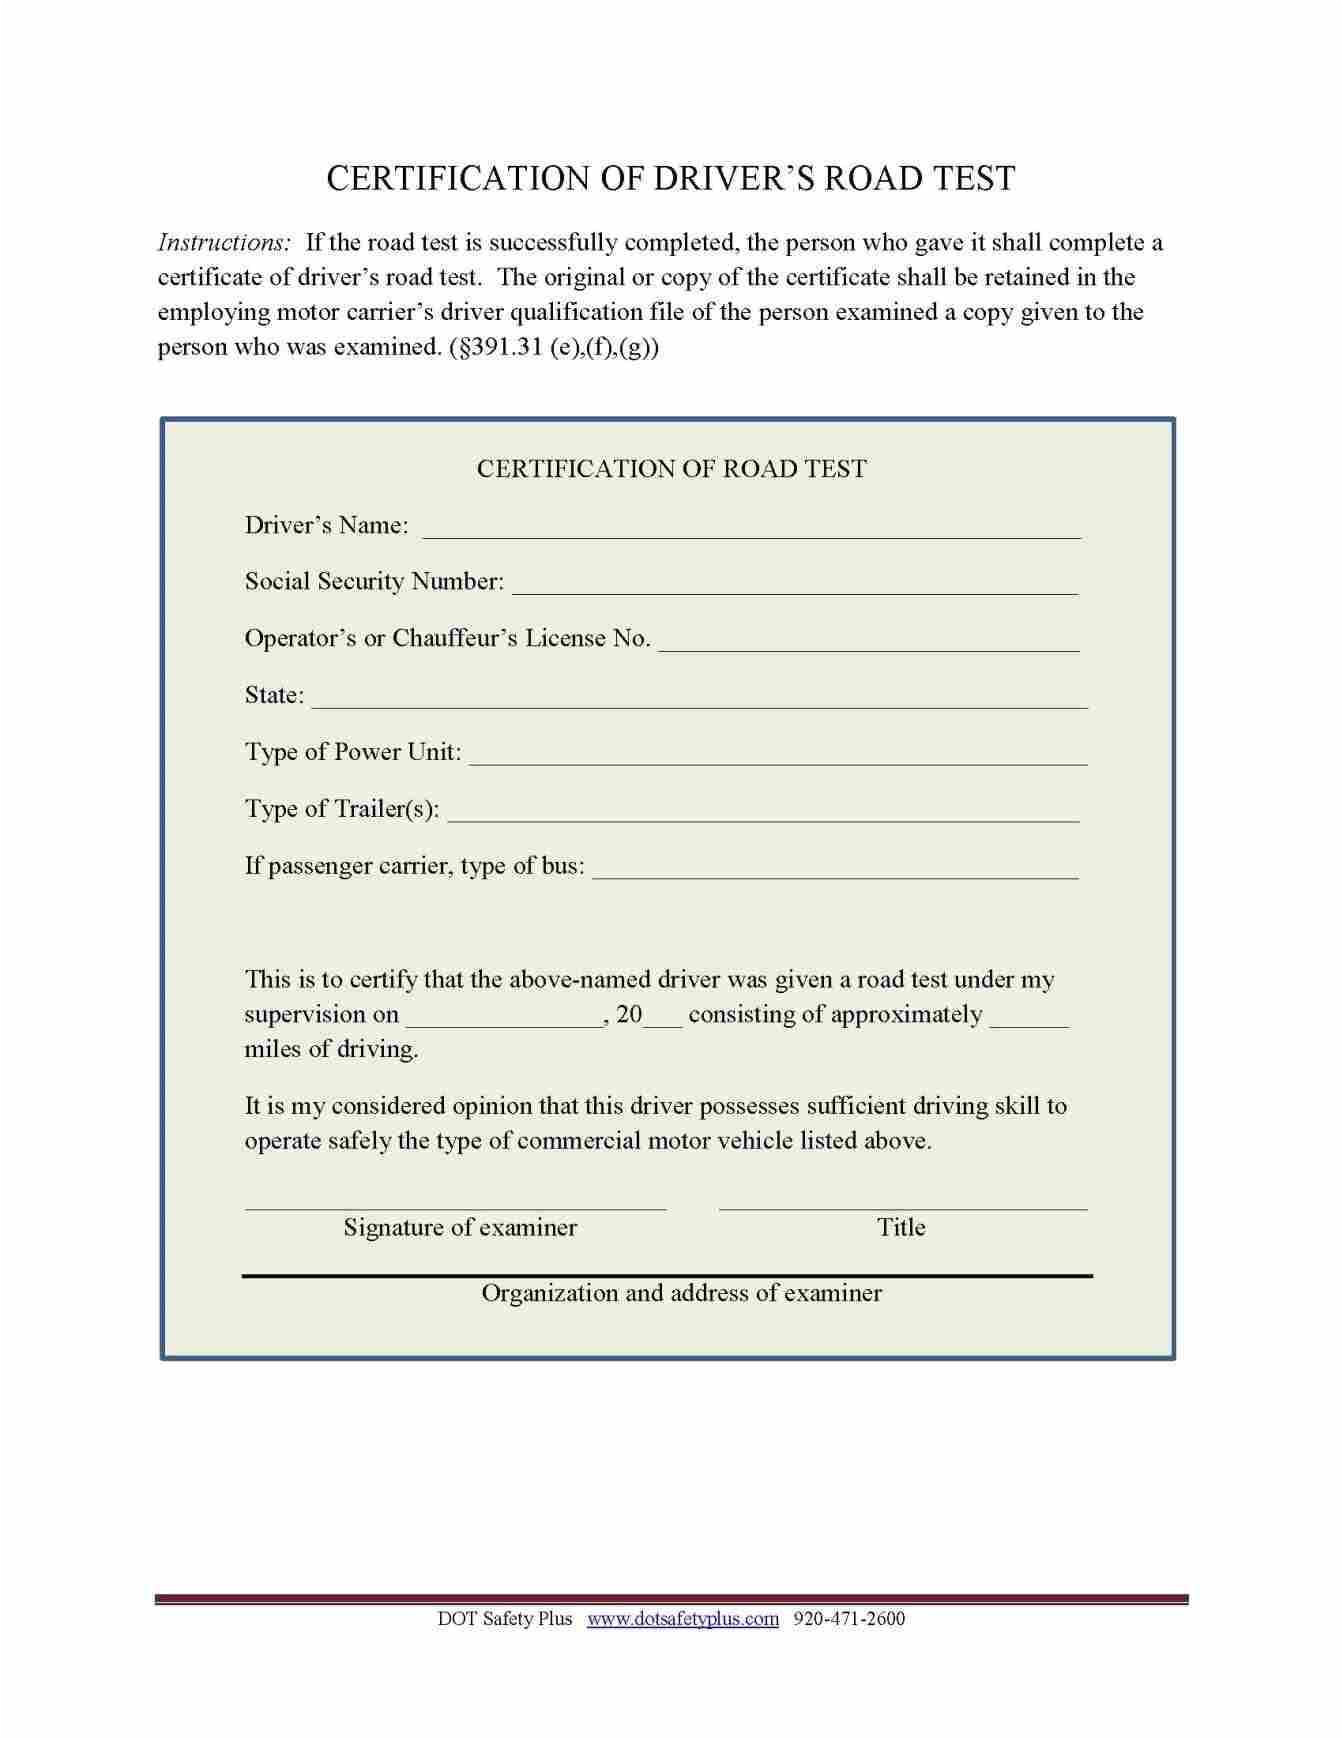 template xhrdto st gabrielus youth nwcg images templates example free nwcg safety training certificate template certificate template images templates example free jpg